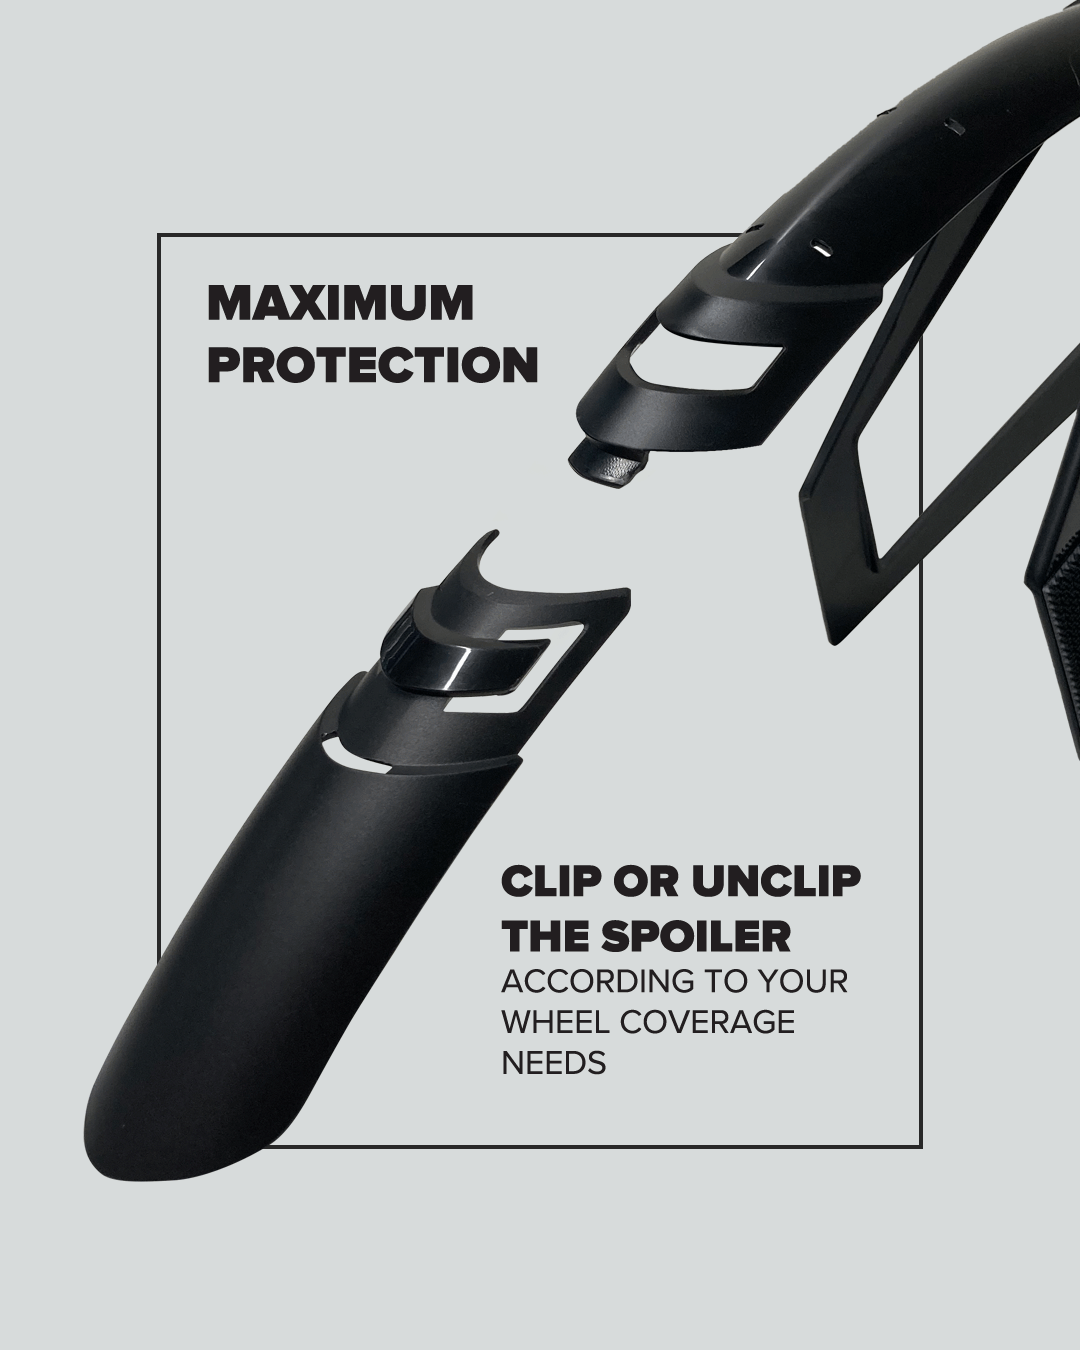 Polisport R-Mud Mudguards Set designed for 28" wheels, featuring a precision-engineered design for efficient splash protection and compatibility with a variety of road bikes.